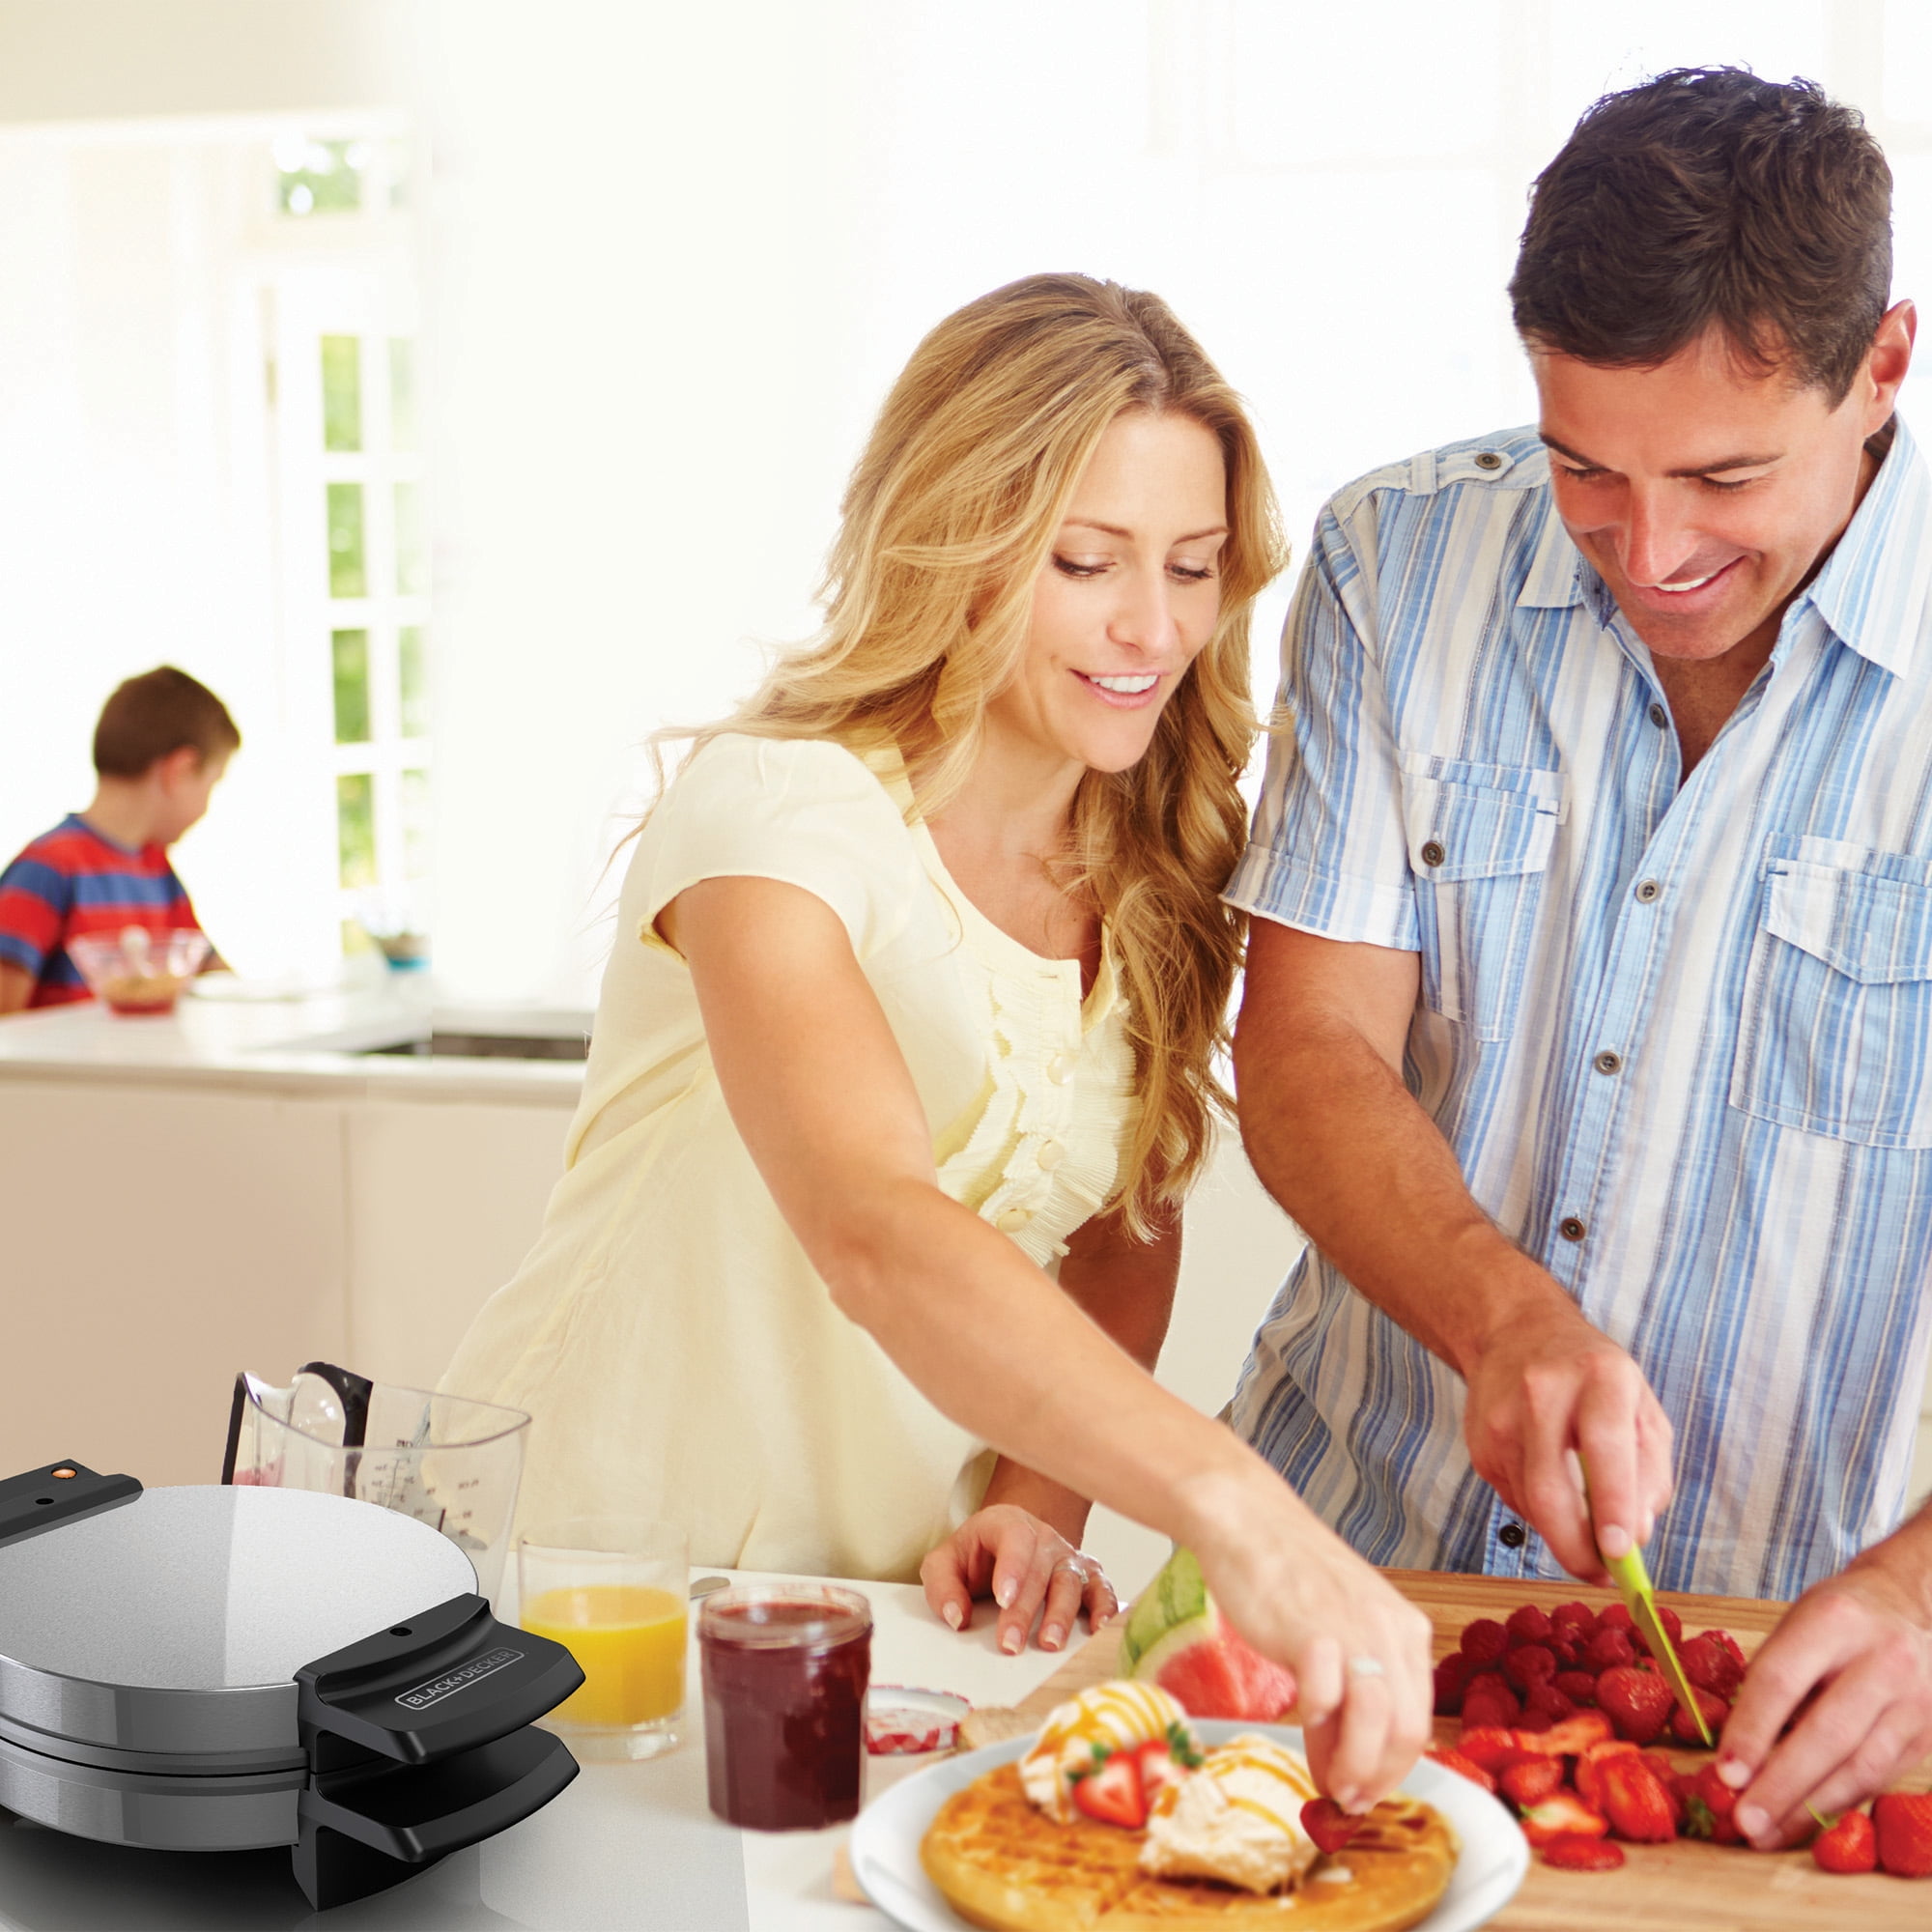  BLACK+DECKER Belgian Waffle Maker, Stainless Steel,  WMB500,Silver: Electric Waffle Irons: Home & Kitchen